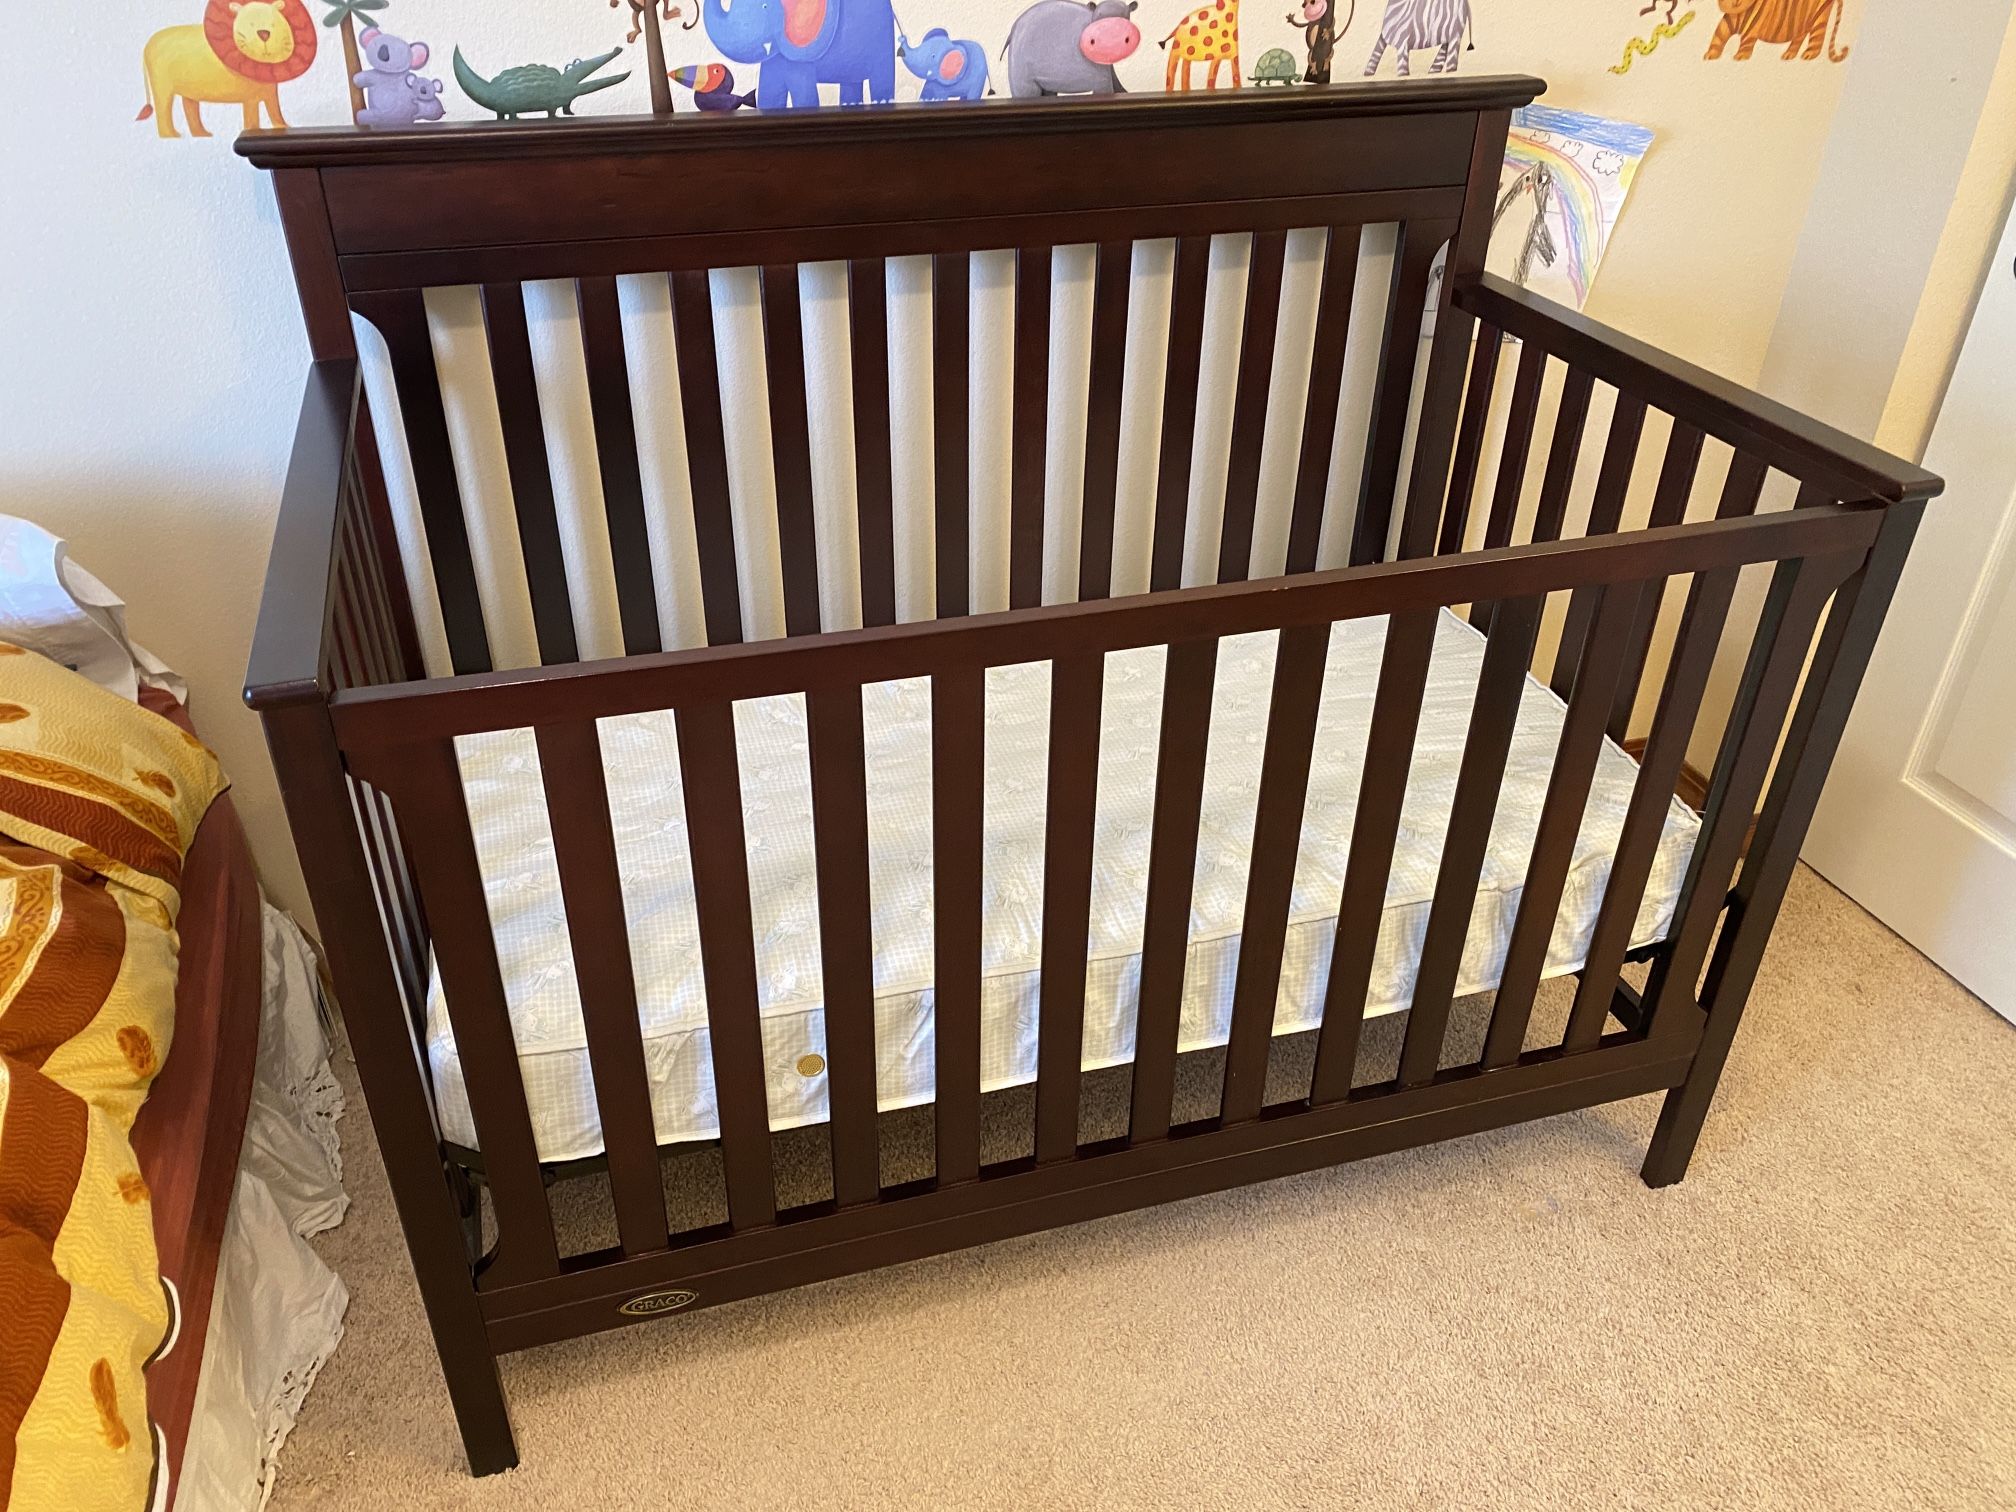 Graco Baby Crib With Sealy Mattress In Great Condition 